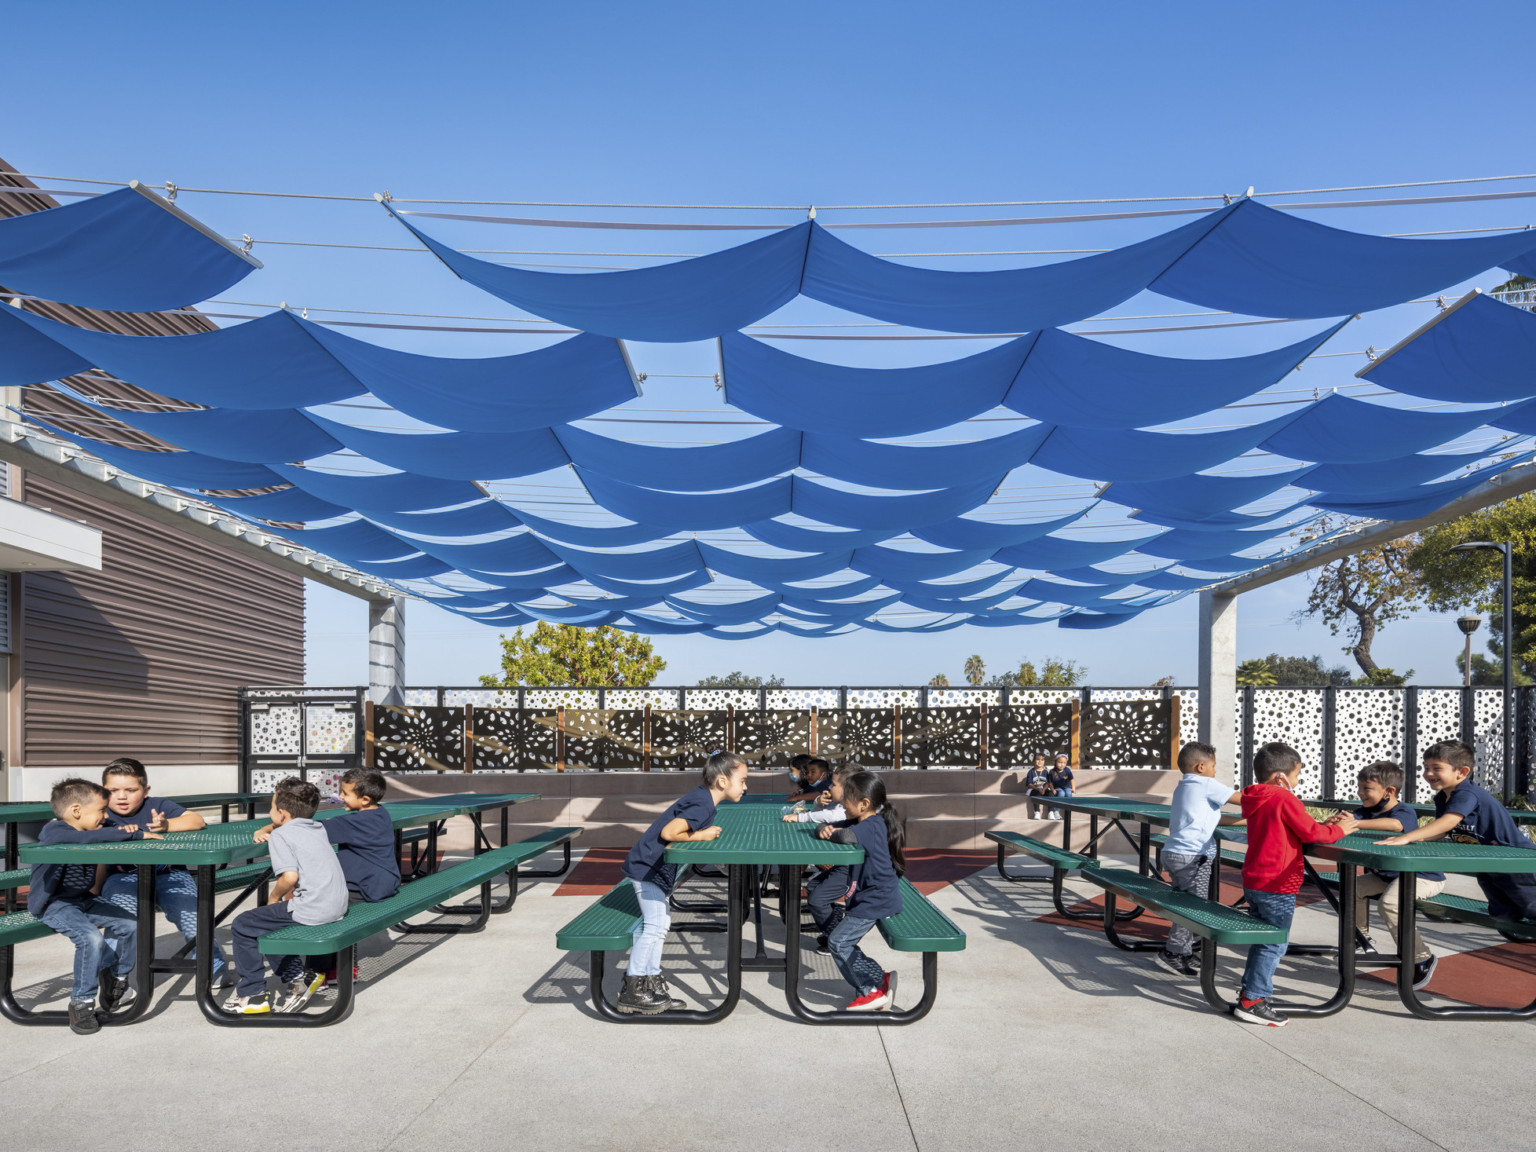 Outdoor seating area shaded from above by draping blue panels of fabric. Students sit at rows of green picnic tables, white fence